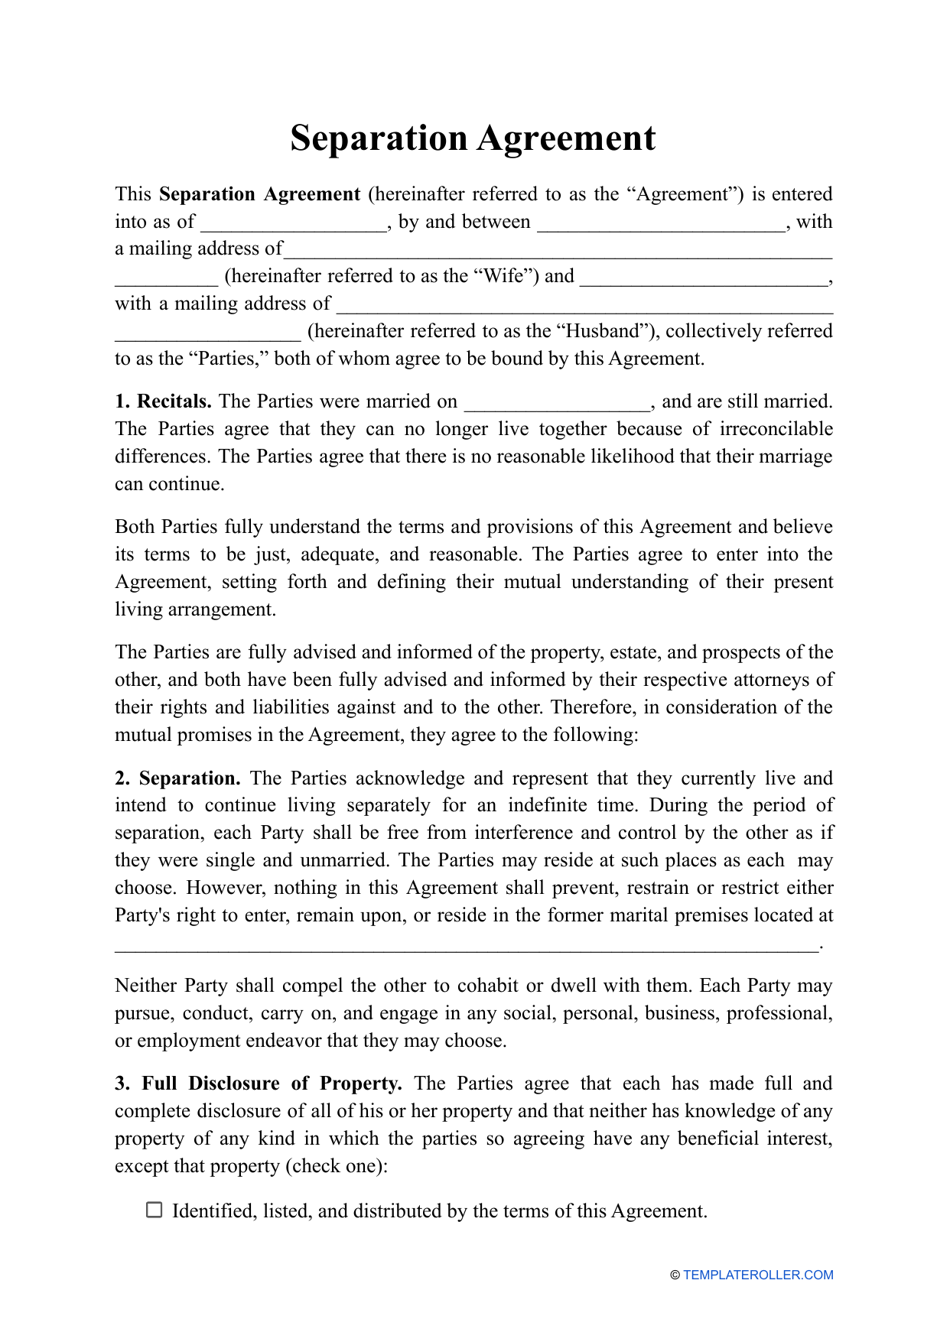 Separation Agreement Template, Page 1